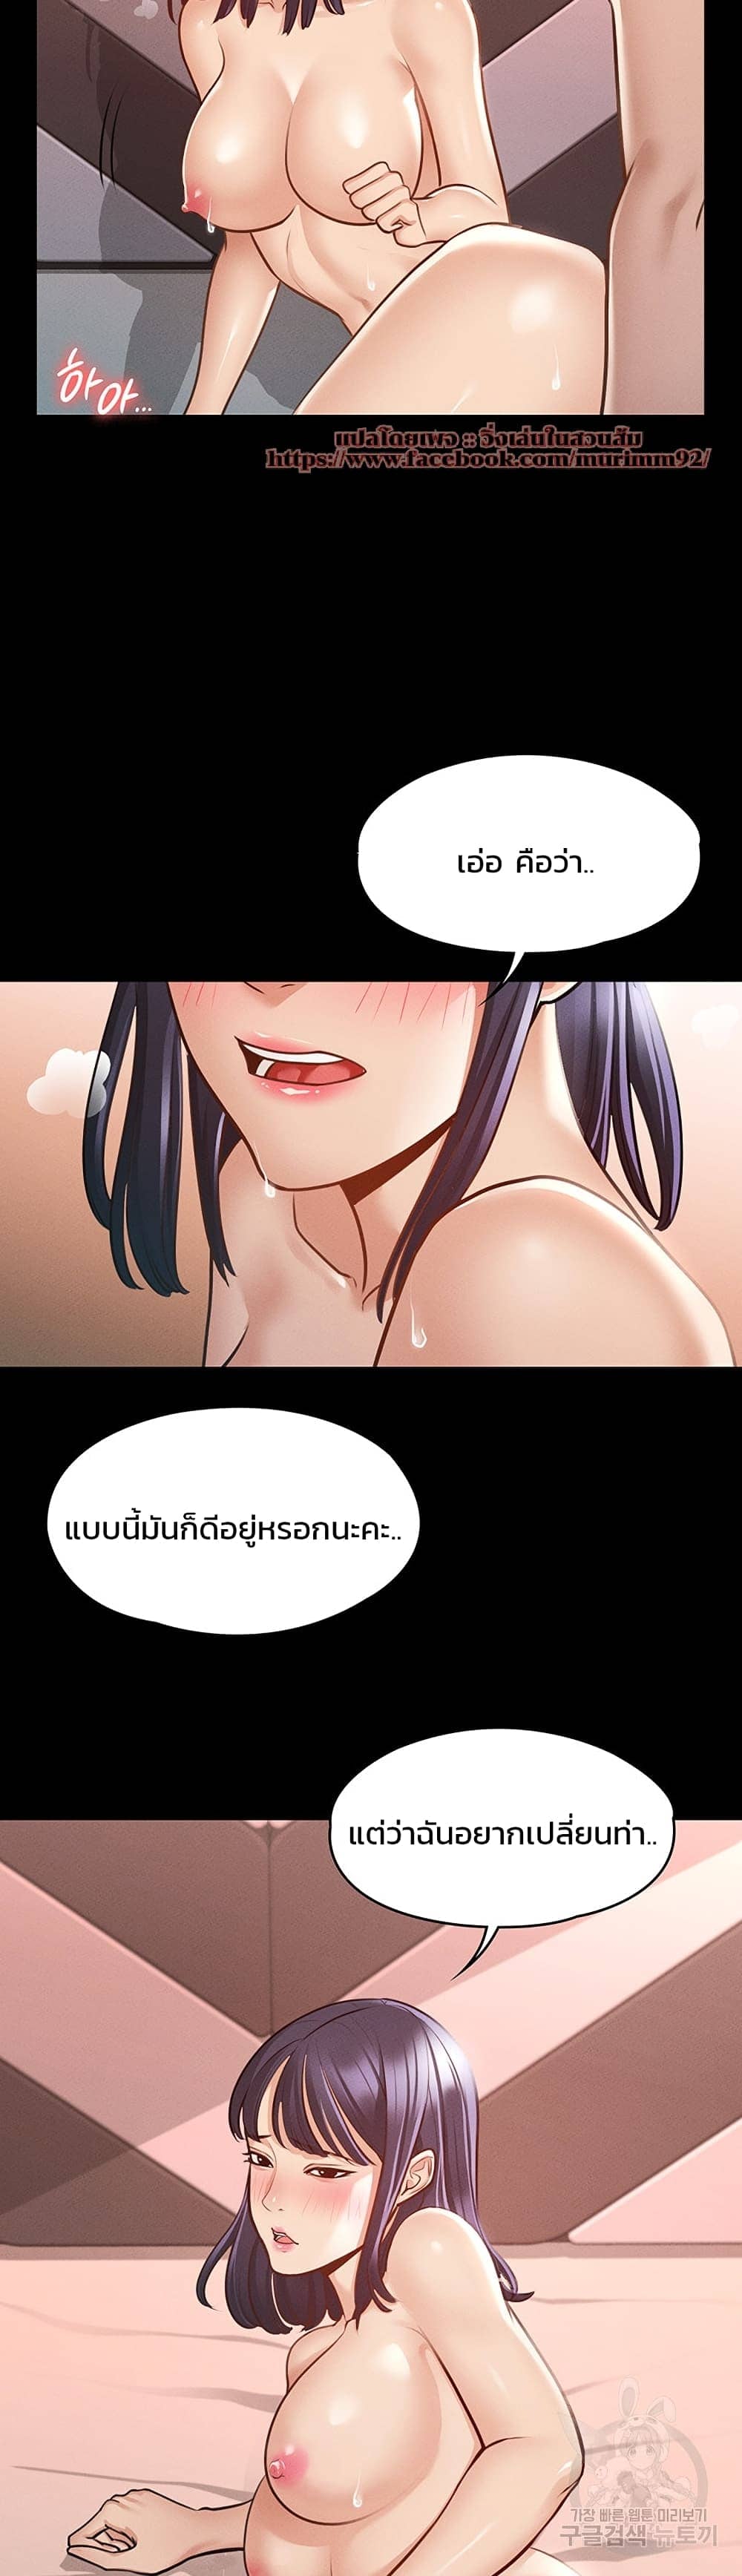 Workplace Manager Privileges ตอนที่ 7 ภาพ 1